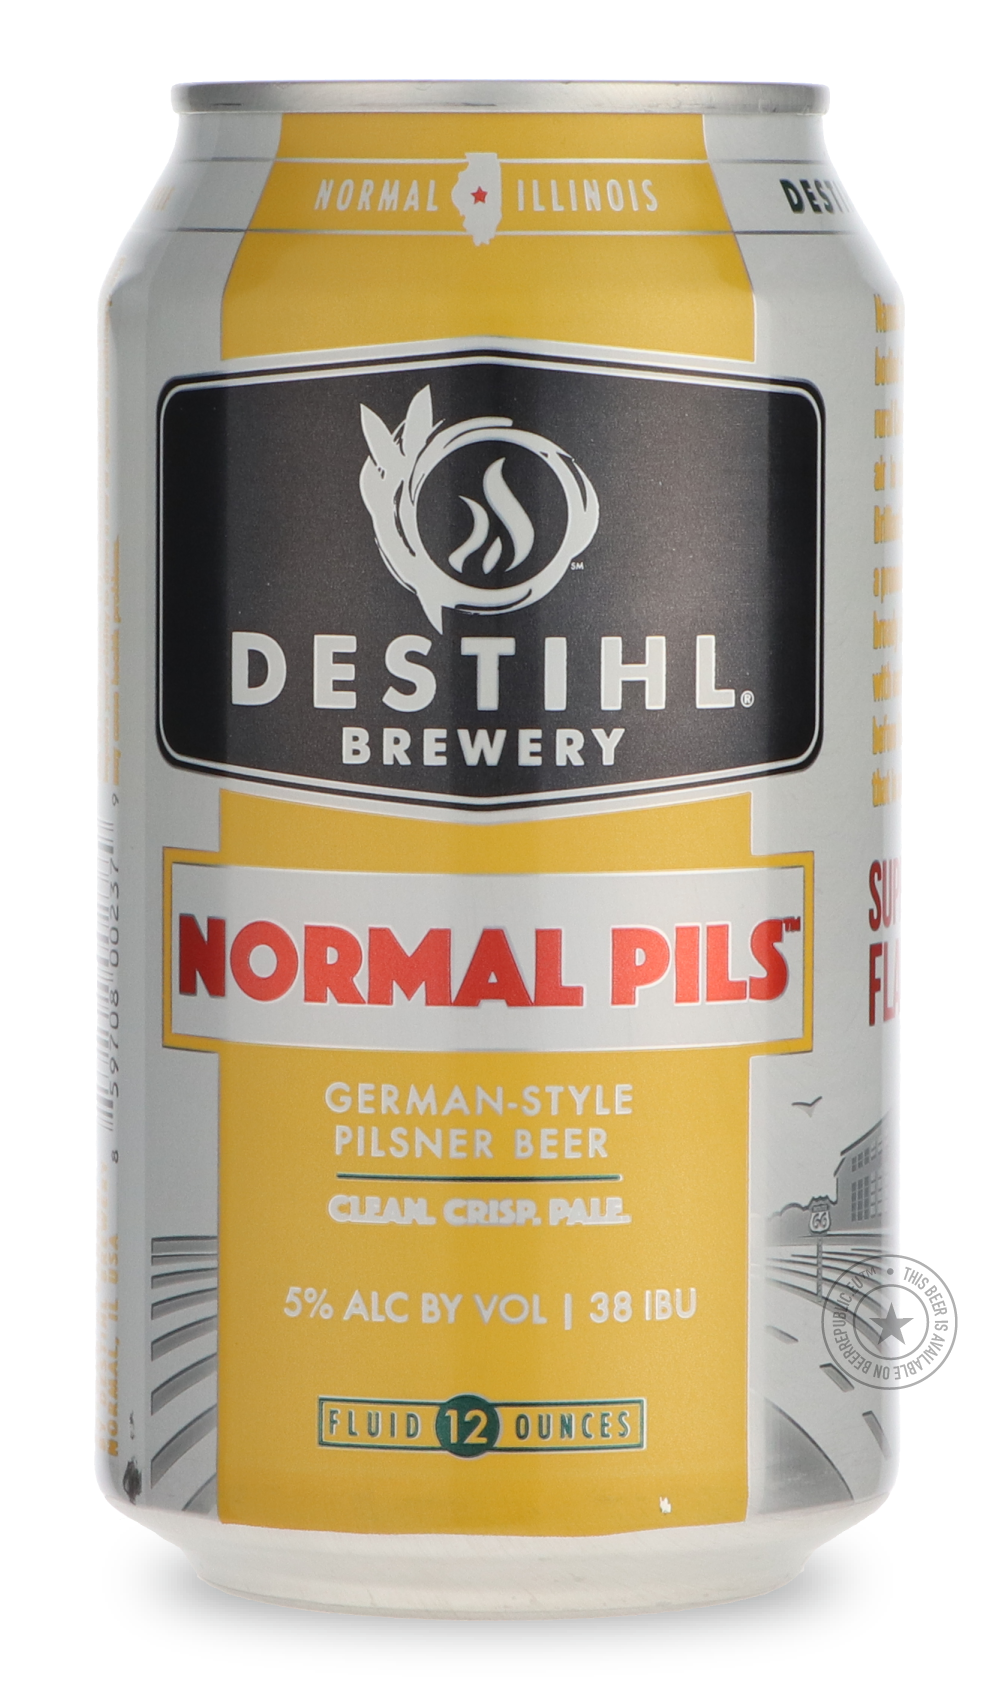 -Destihl- Normal Pils-Pale- Only @ Beer Republic - The best online beer store for American & Canadian craft beer - Buy beer online from the USA and Canada - Bier online kopen - Amerikaans bier kopen - Craft beer store - Craft beer kopen - Amerikanisch bier kaufen - Bier online kaufen - Acheter biere online - IPA - Stout - Porter - New England IPA - Hazy IPA - Imperial Stout - Barrel Aged - Barrel Aged Imperial Stout - Brown - Dark beer - Blond - Blonde - Pilsner - Lager - Wheat - Weizen - Amber - Barley Win